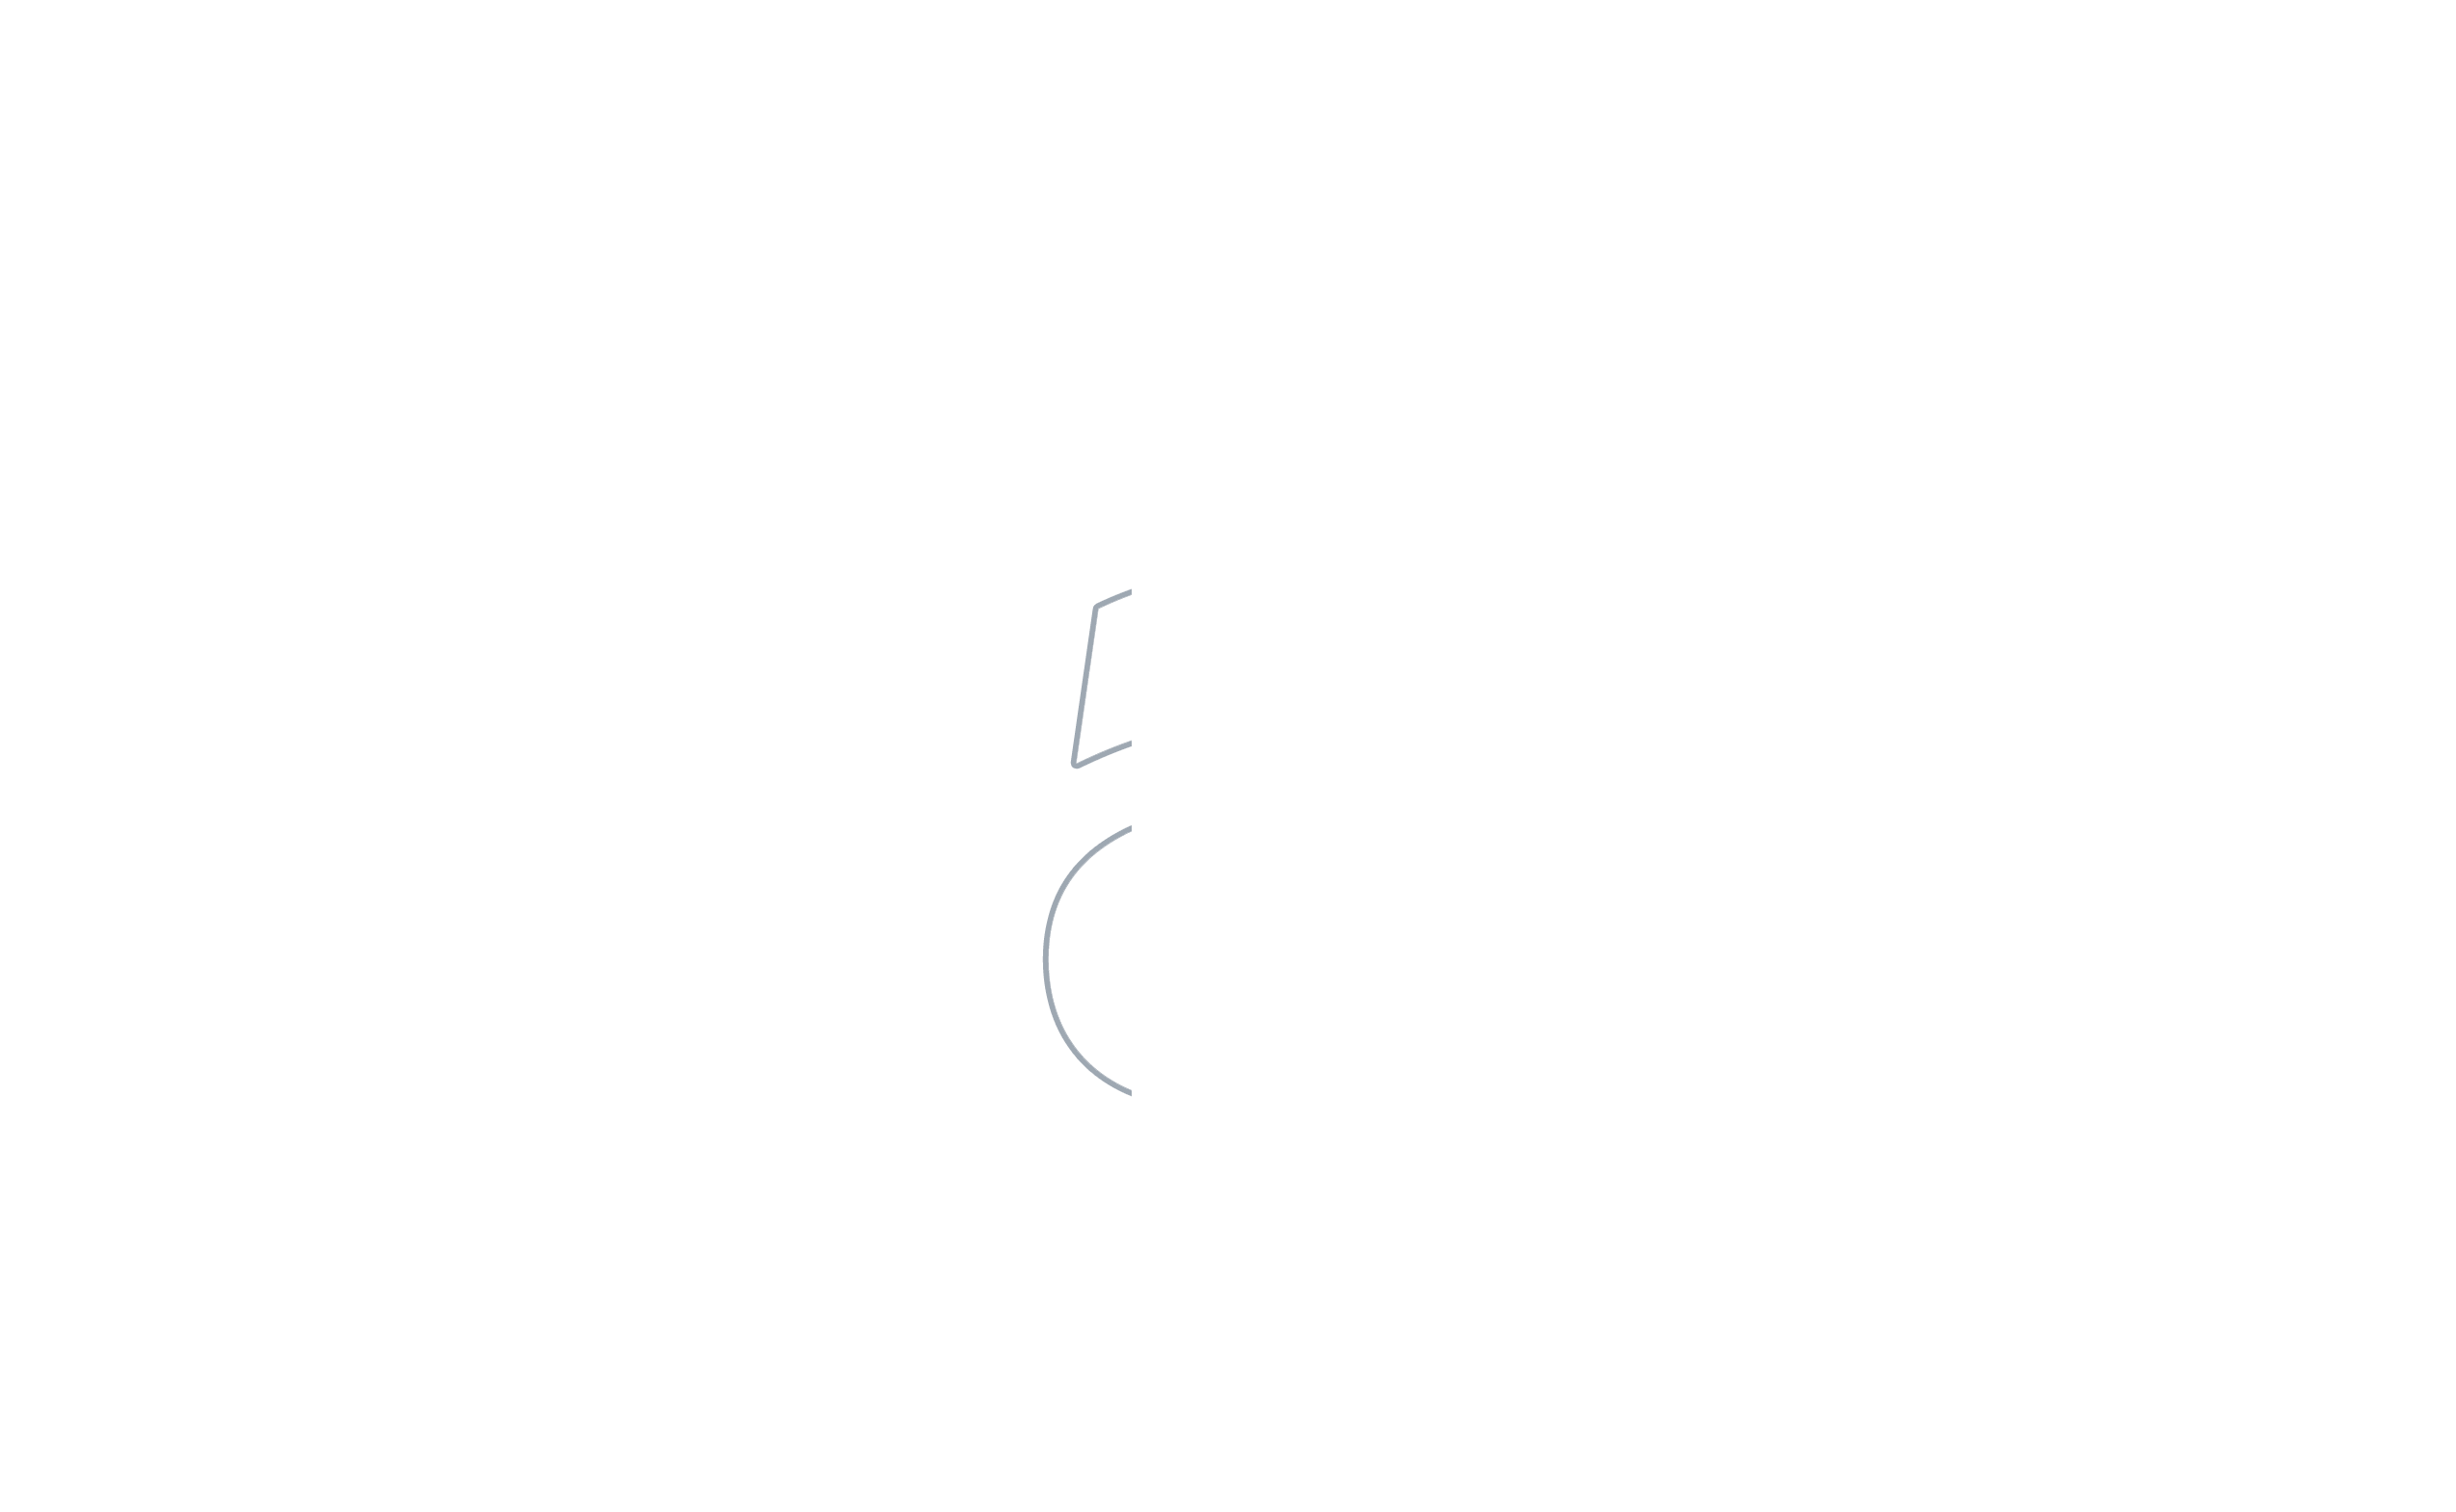 sdarj - the southern delaware alliance for racial justice